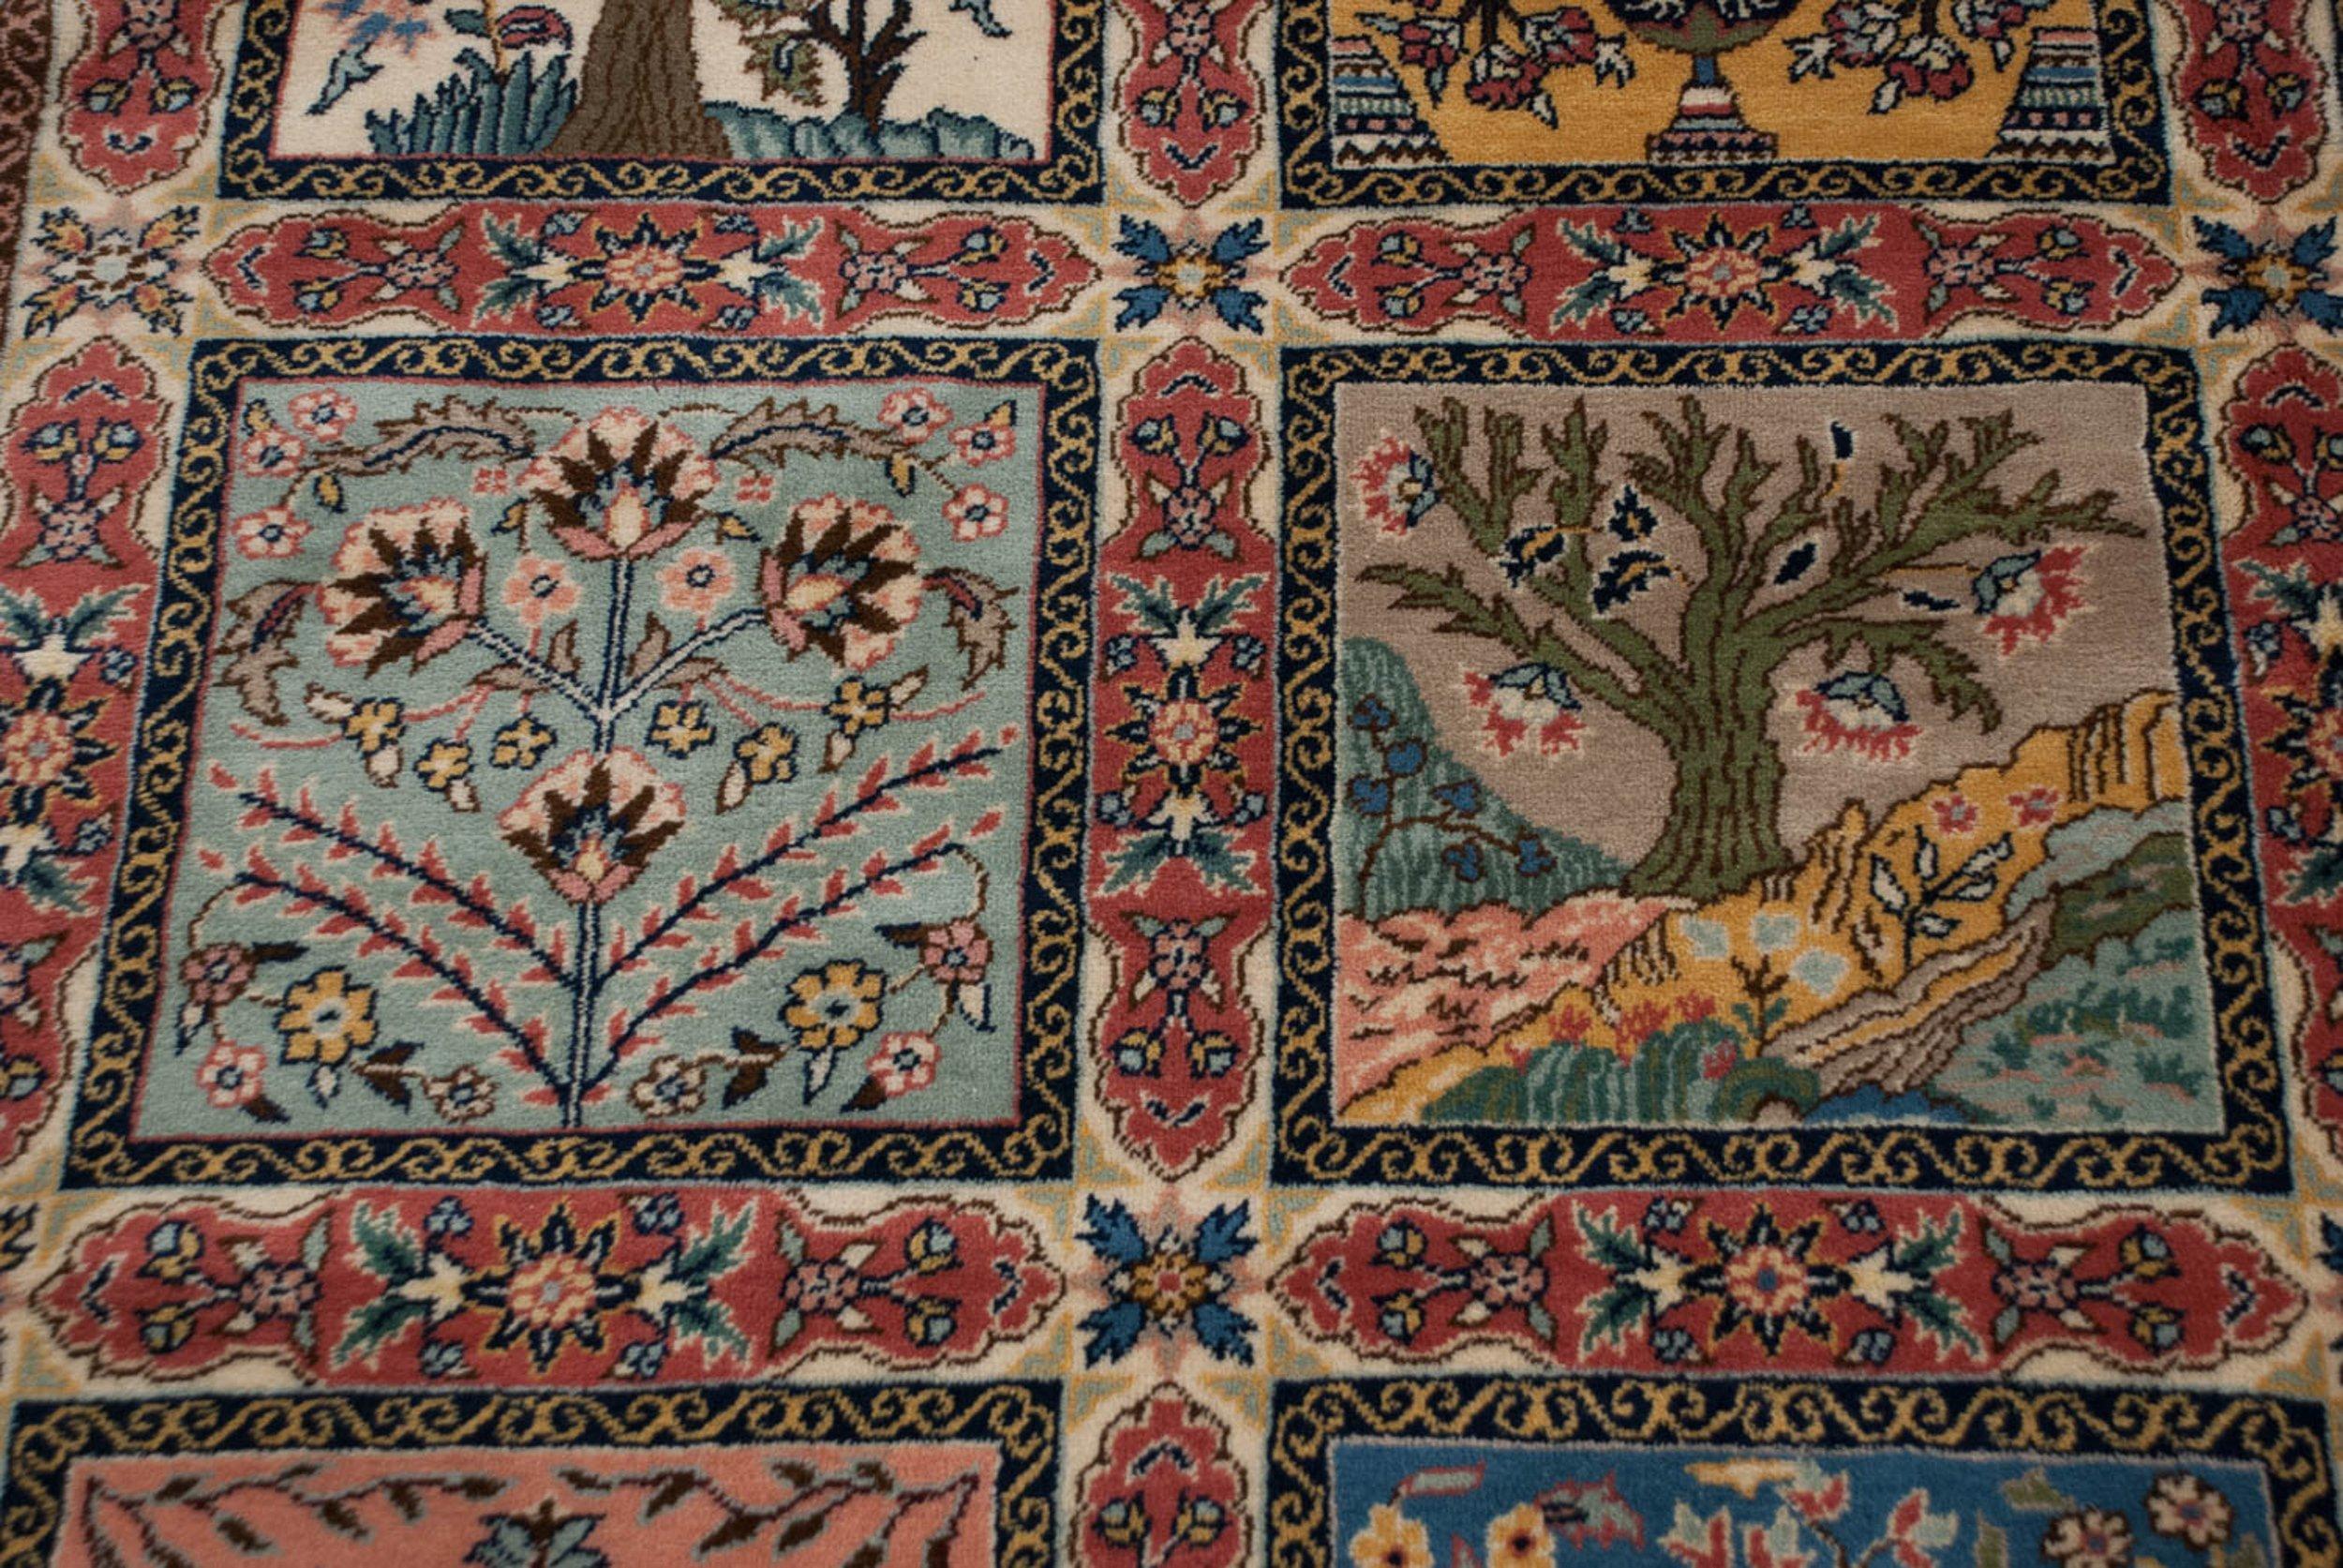 Gardens of paradise design motif with roundel pomegrante stylized center medallion within main channels of blossomed buds and germinating plants, surrounded by paneled design motifs in Four Season imagery, bearing tree of life, willow trees, cypress